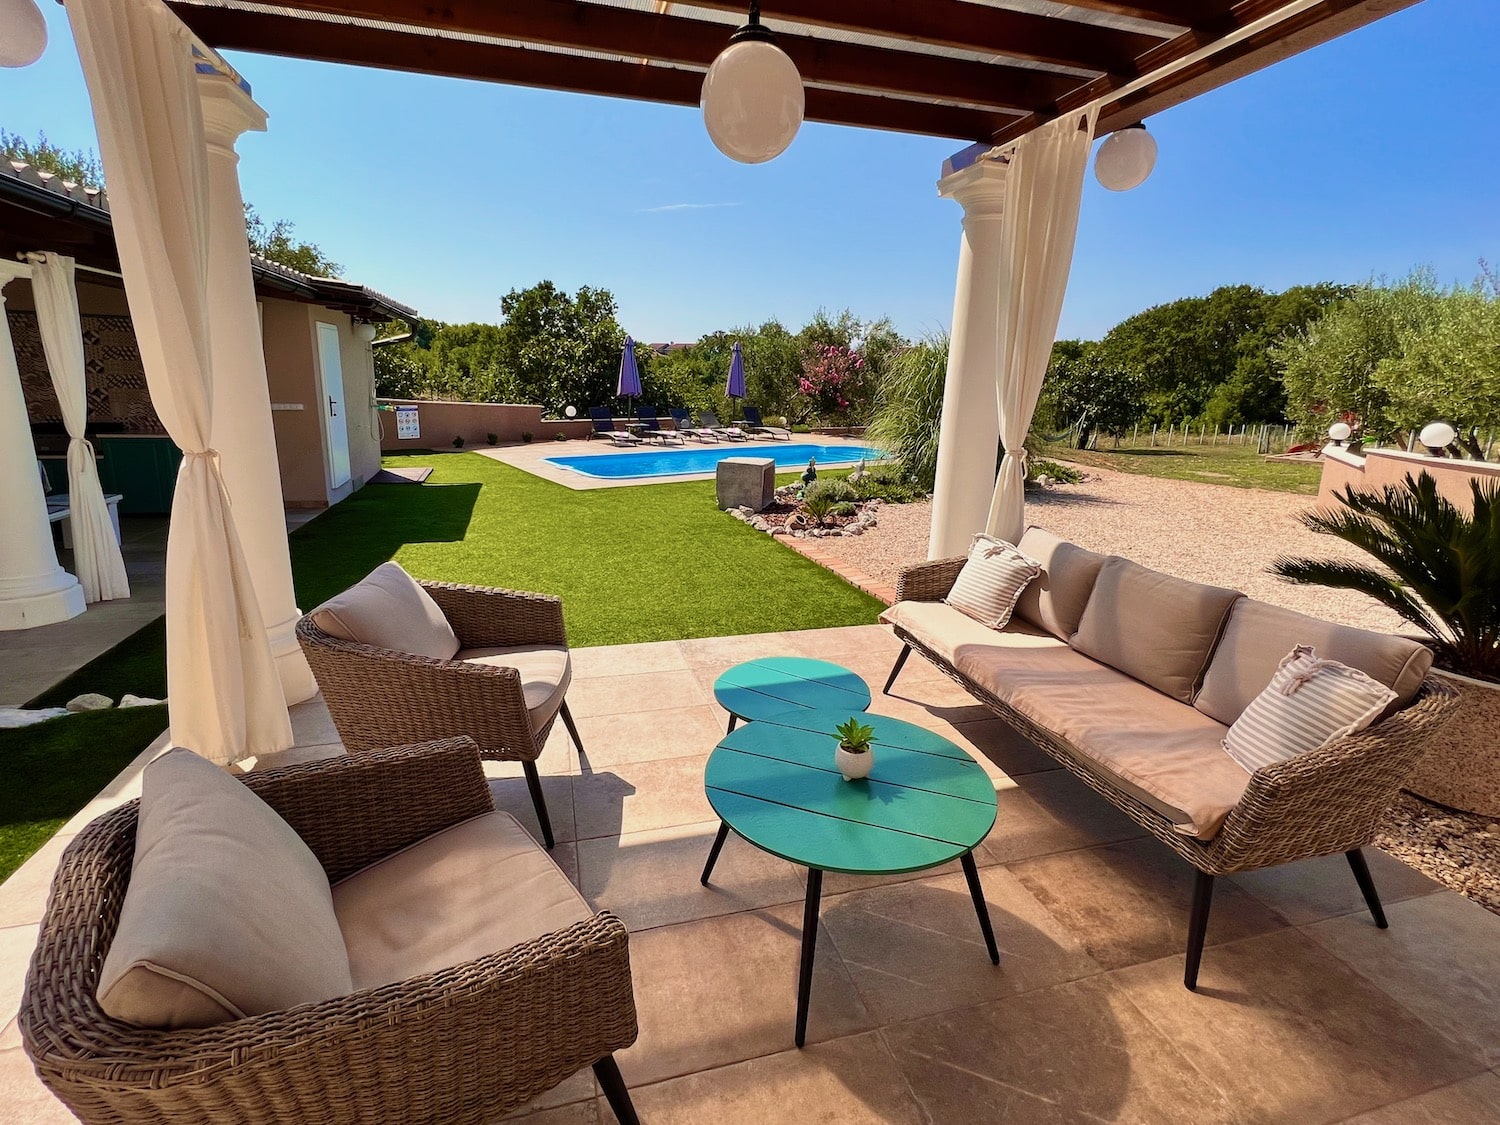 A villa in the countryside is the ideal starting point for your hiking tours. Photo: Sascha Tegtmeyer Sol Villas Sol Tours Krk Experiences Reviews Reviews